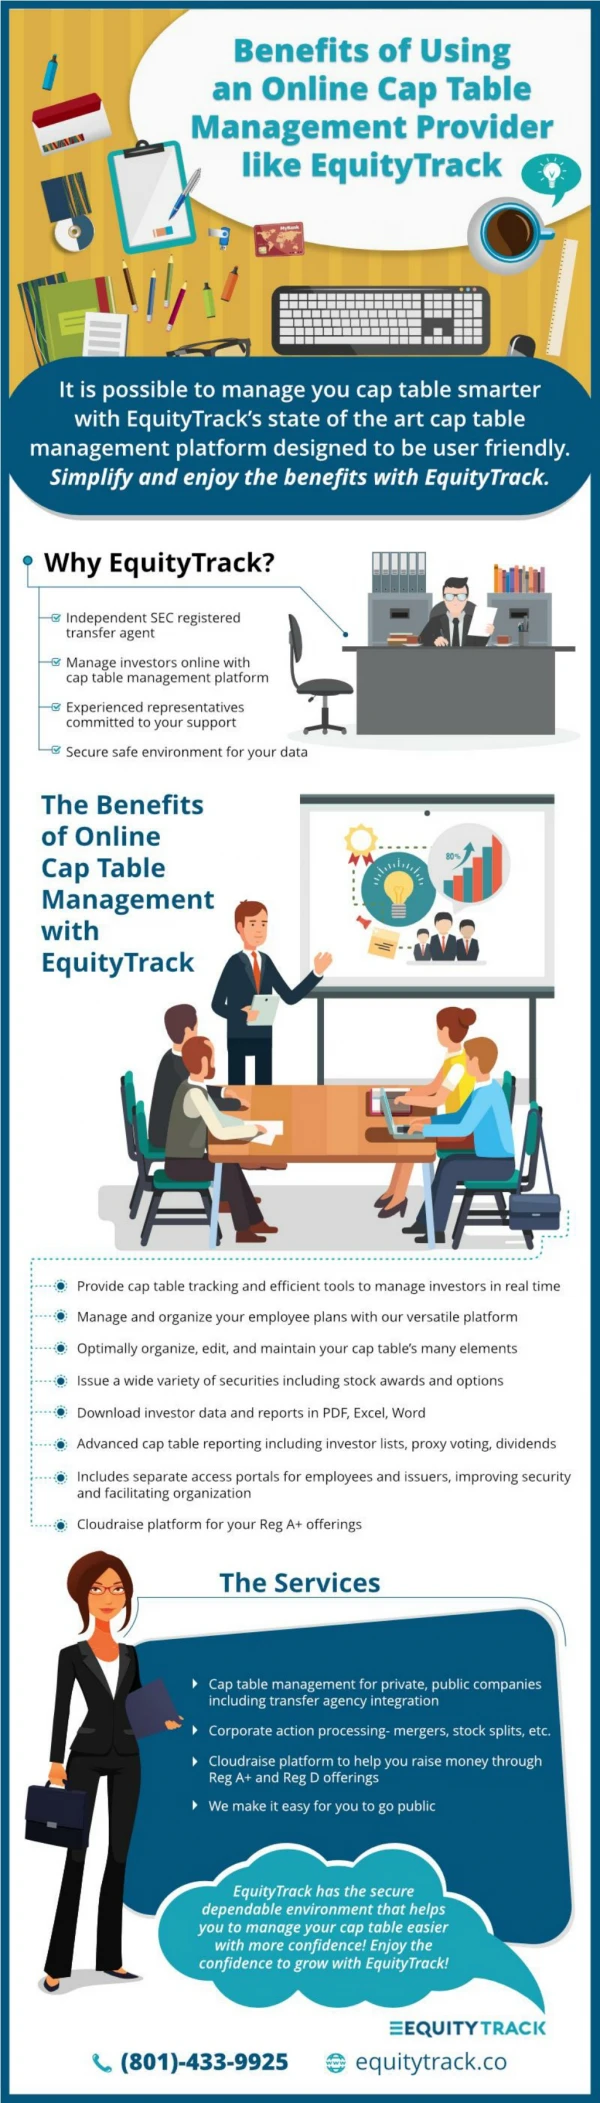 Benefits of Using an Online Cap Table Management Provider like EquityTrack